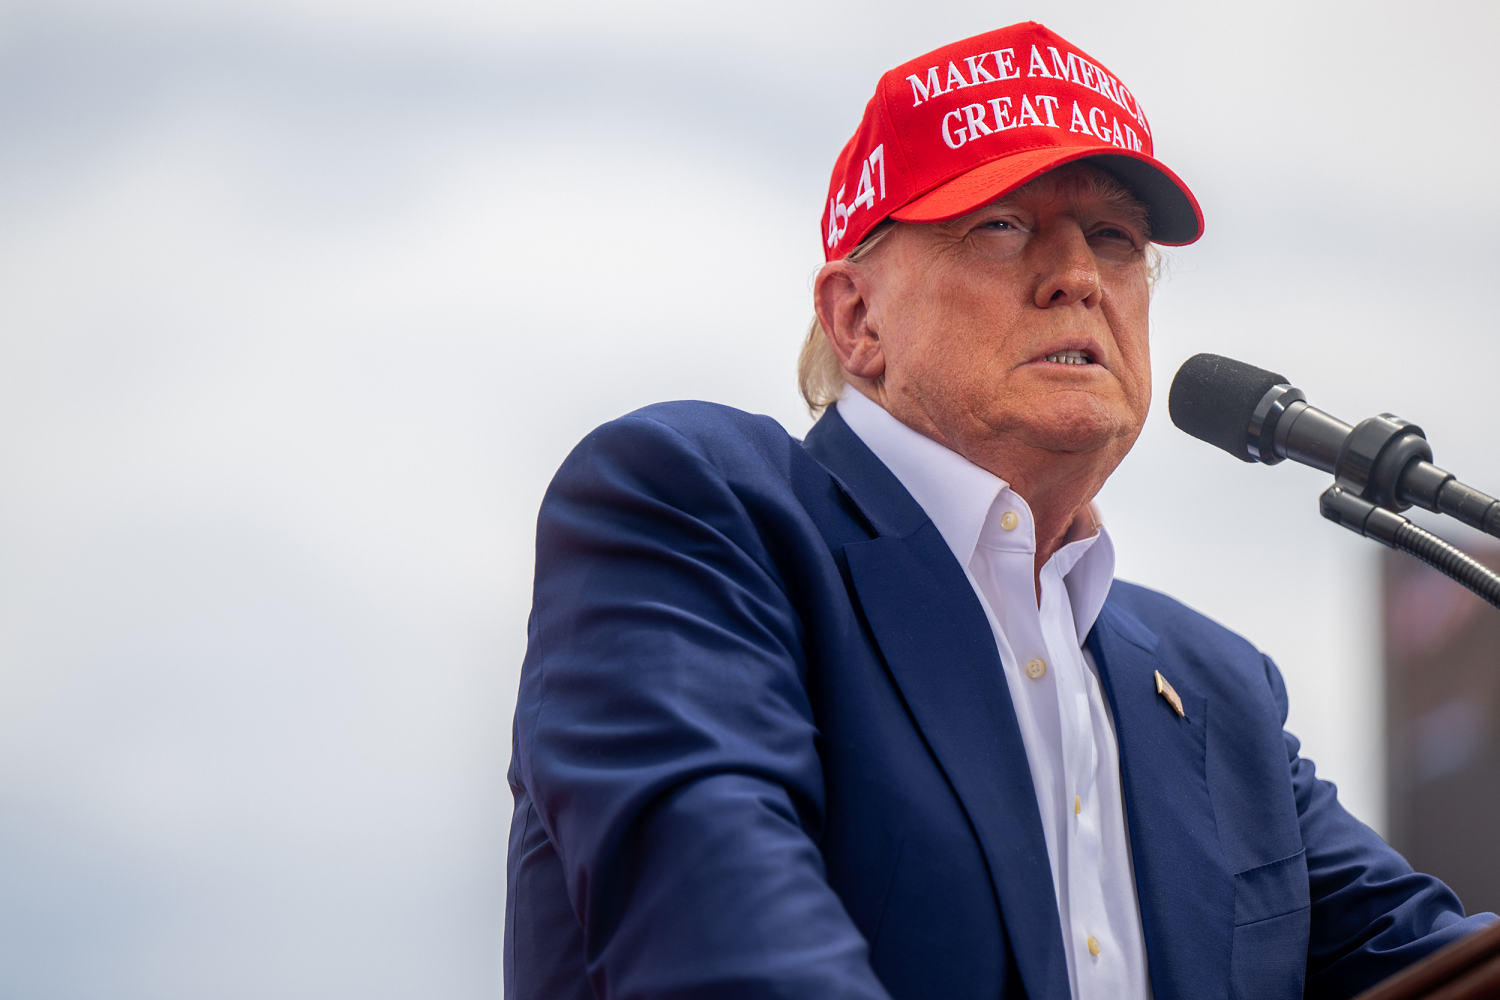 Donald Trump flips on crypto: From 'scam' to building a 'crypto army'